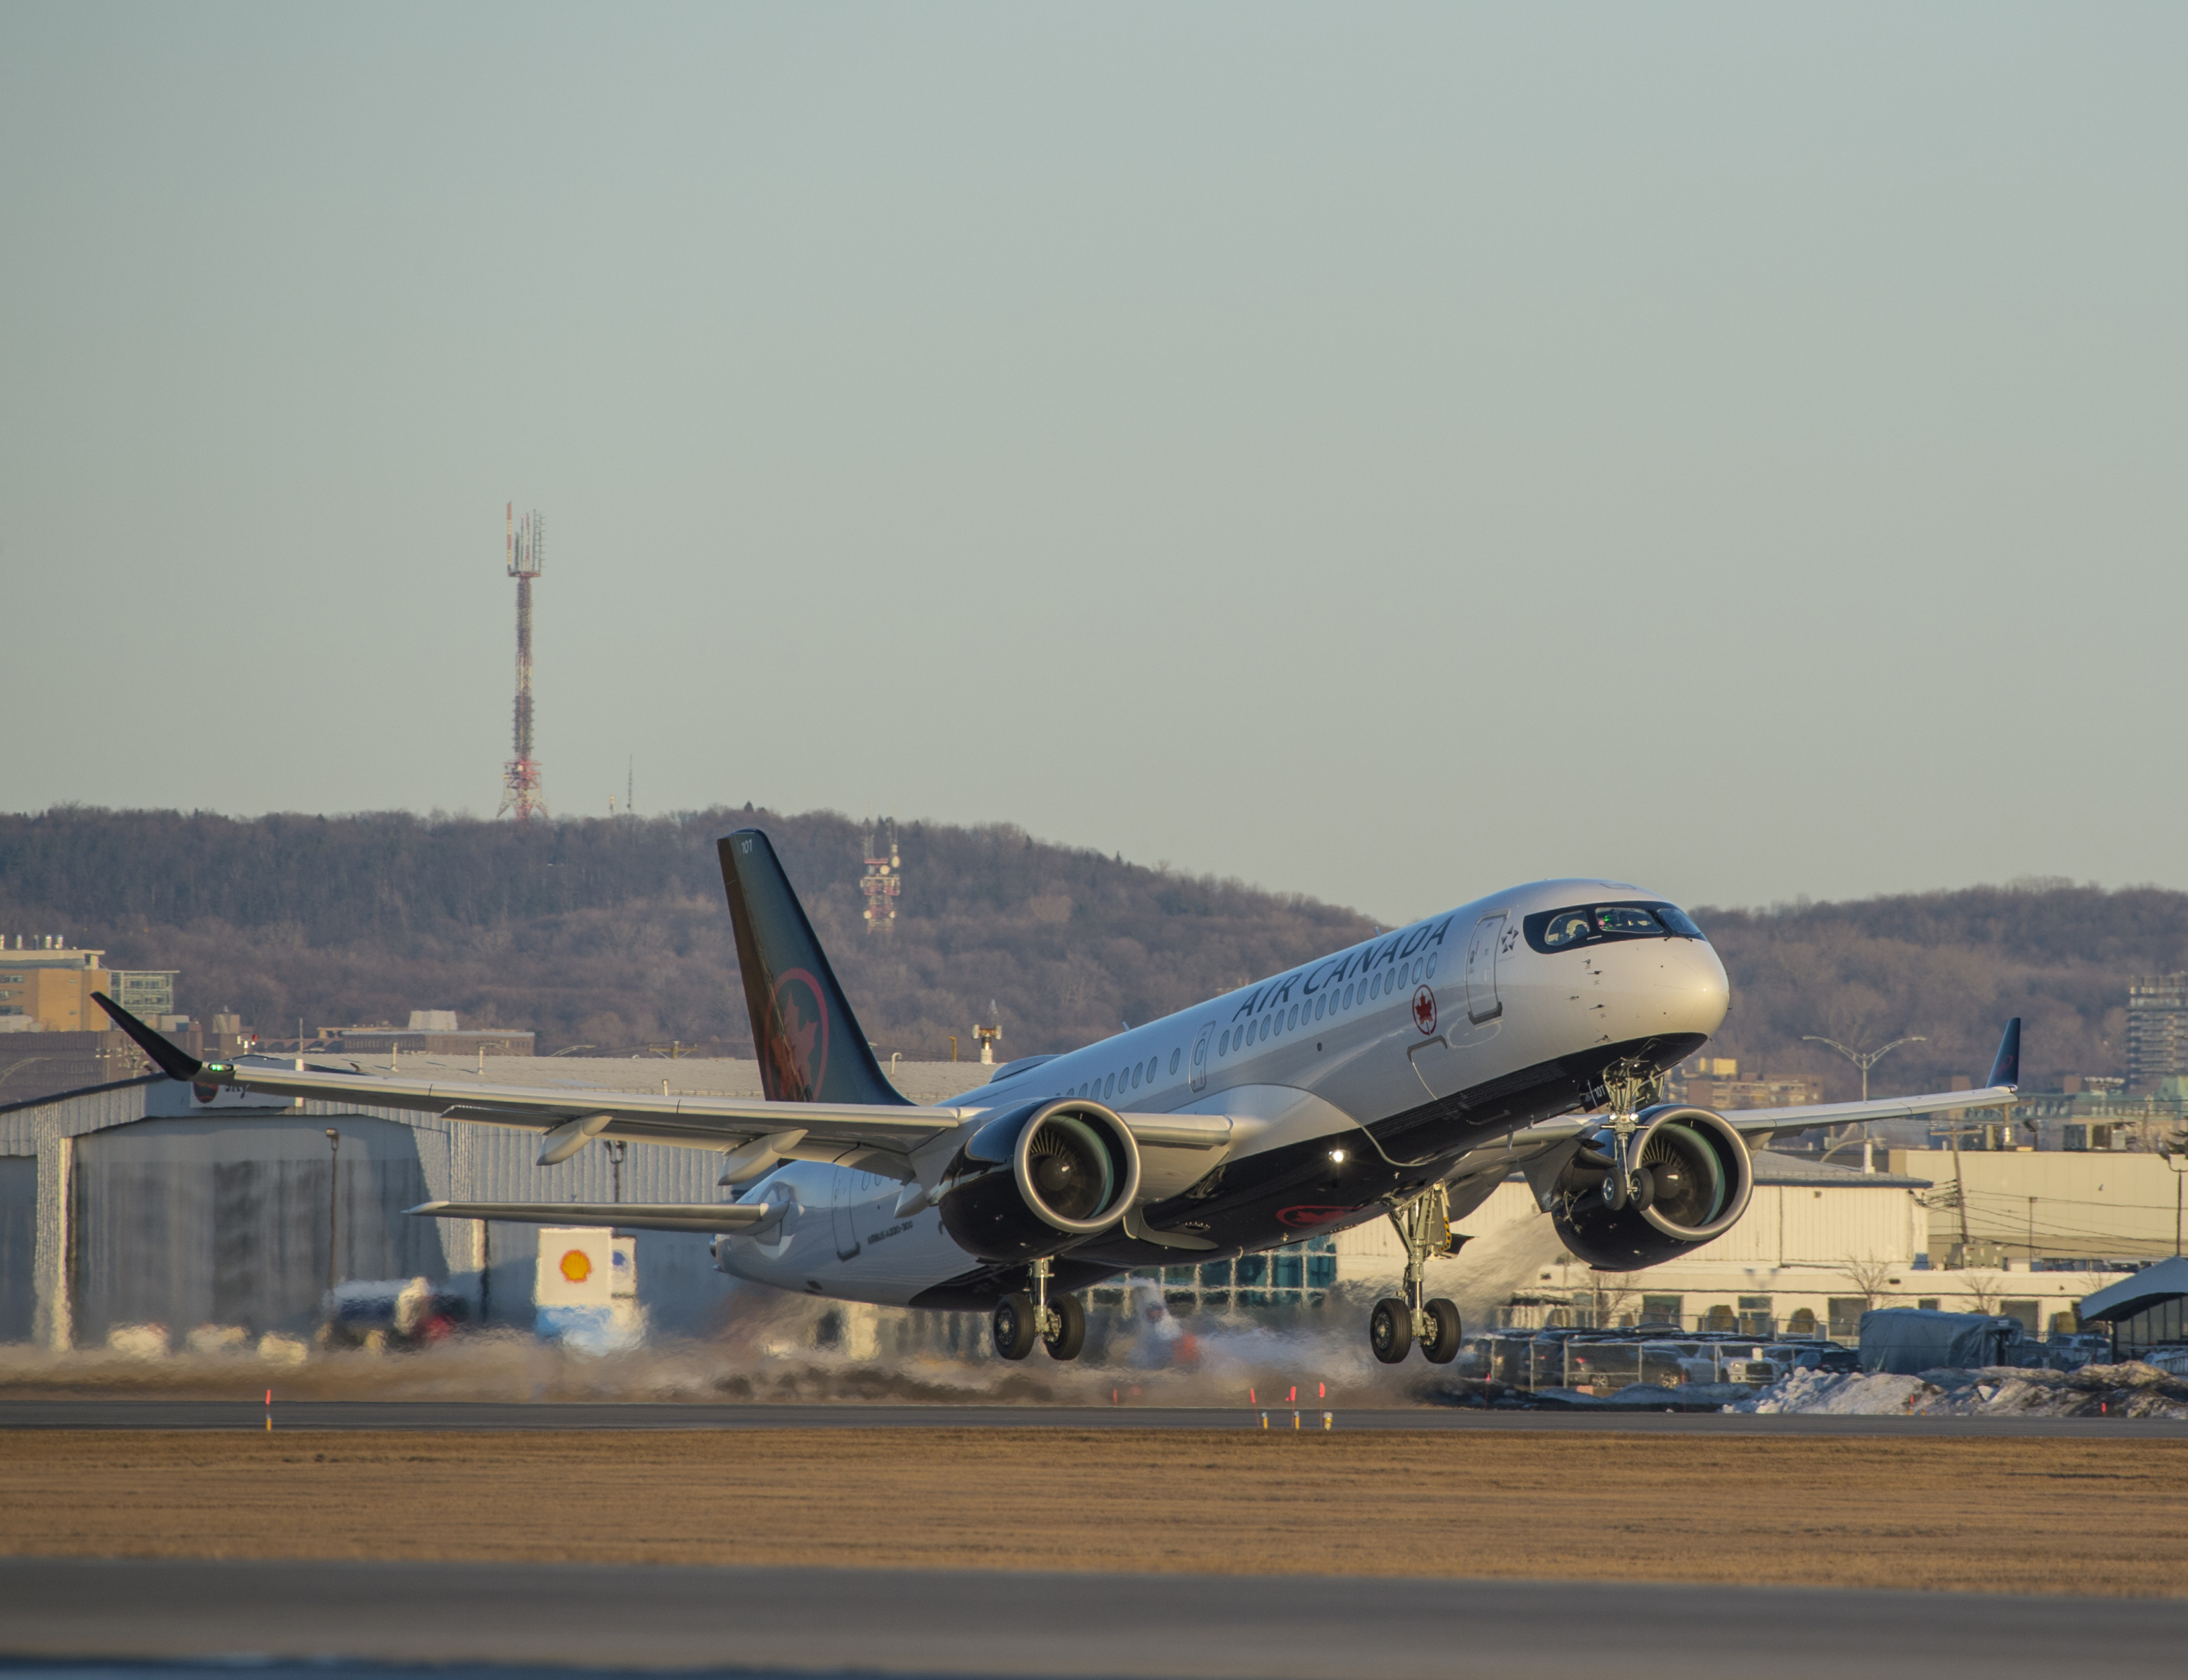 Air Canada Sees More Transborder Strength Thorough New United Deal |  Aviation Week Network